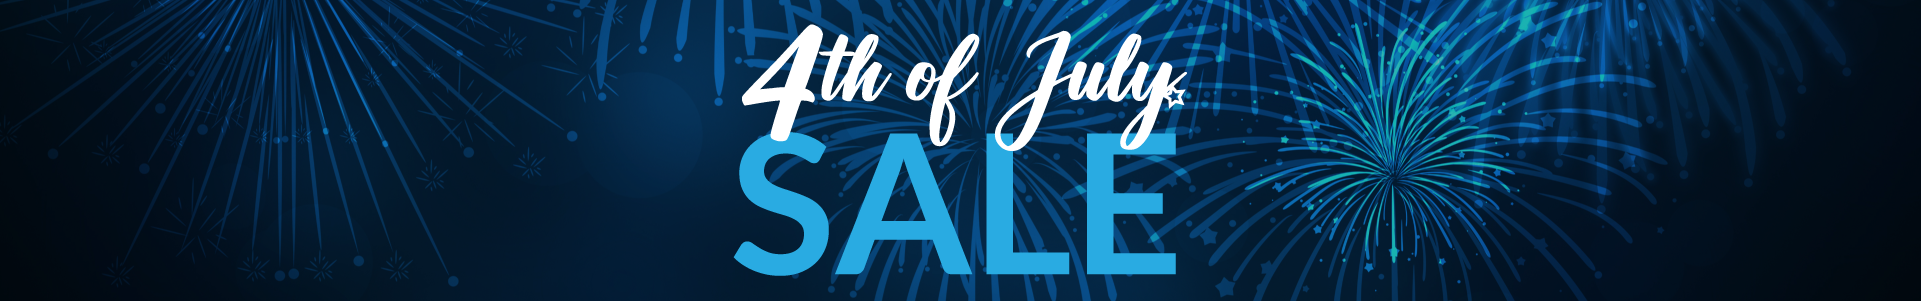 4th of July Sale Seatup.com